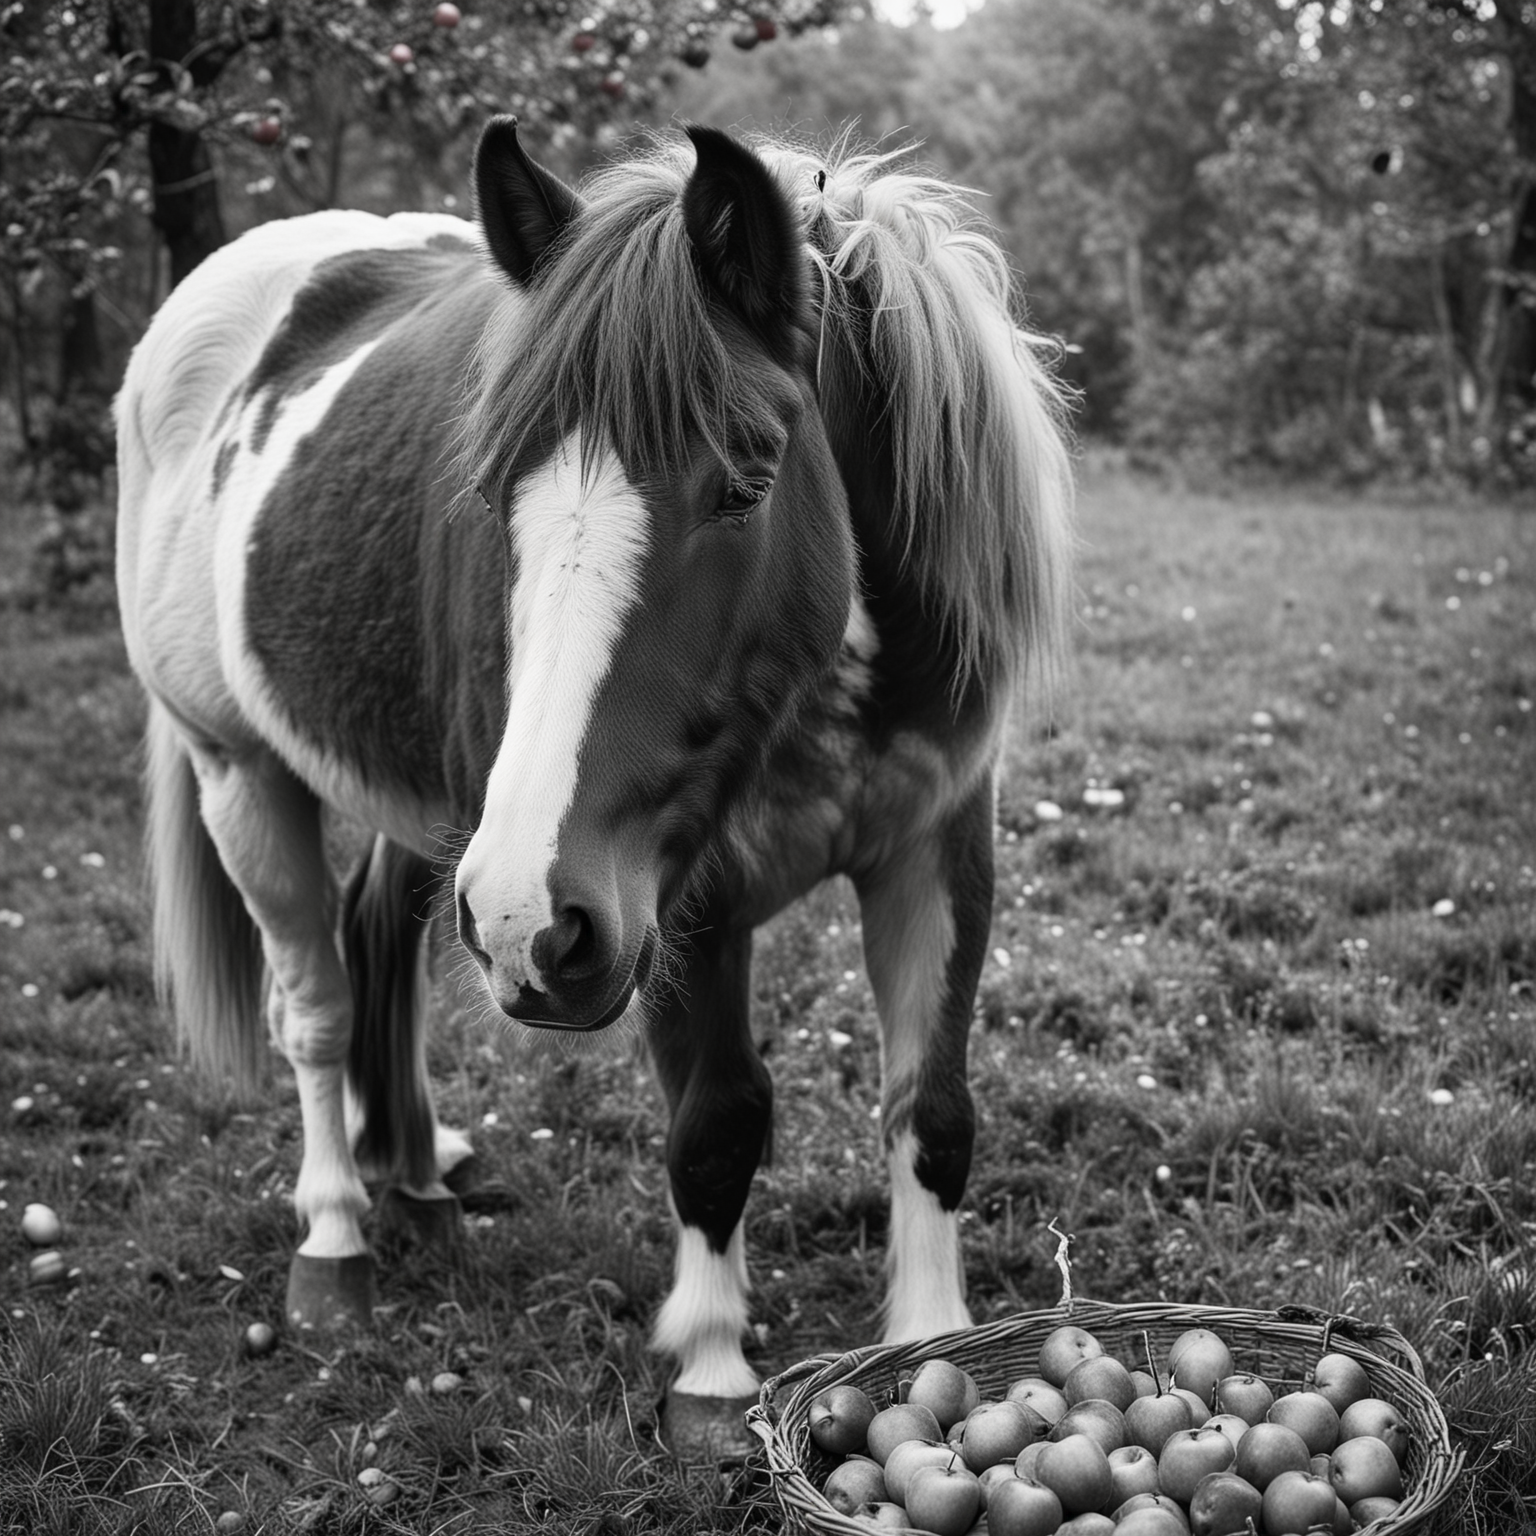 Enigmatic Pony Captivating Black and White Portrait of a Colorful Furry Pony Enjoying Red Apples